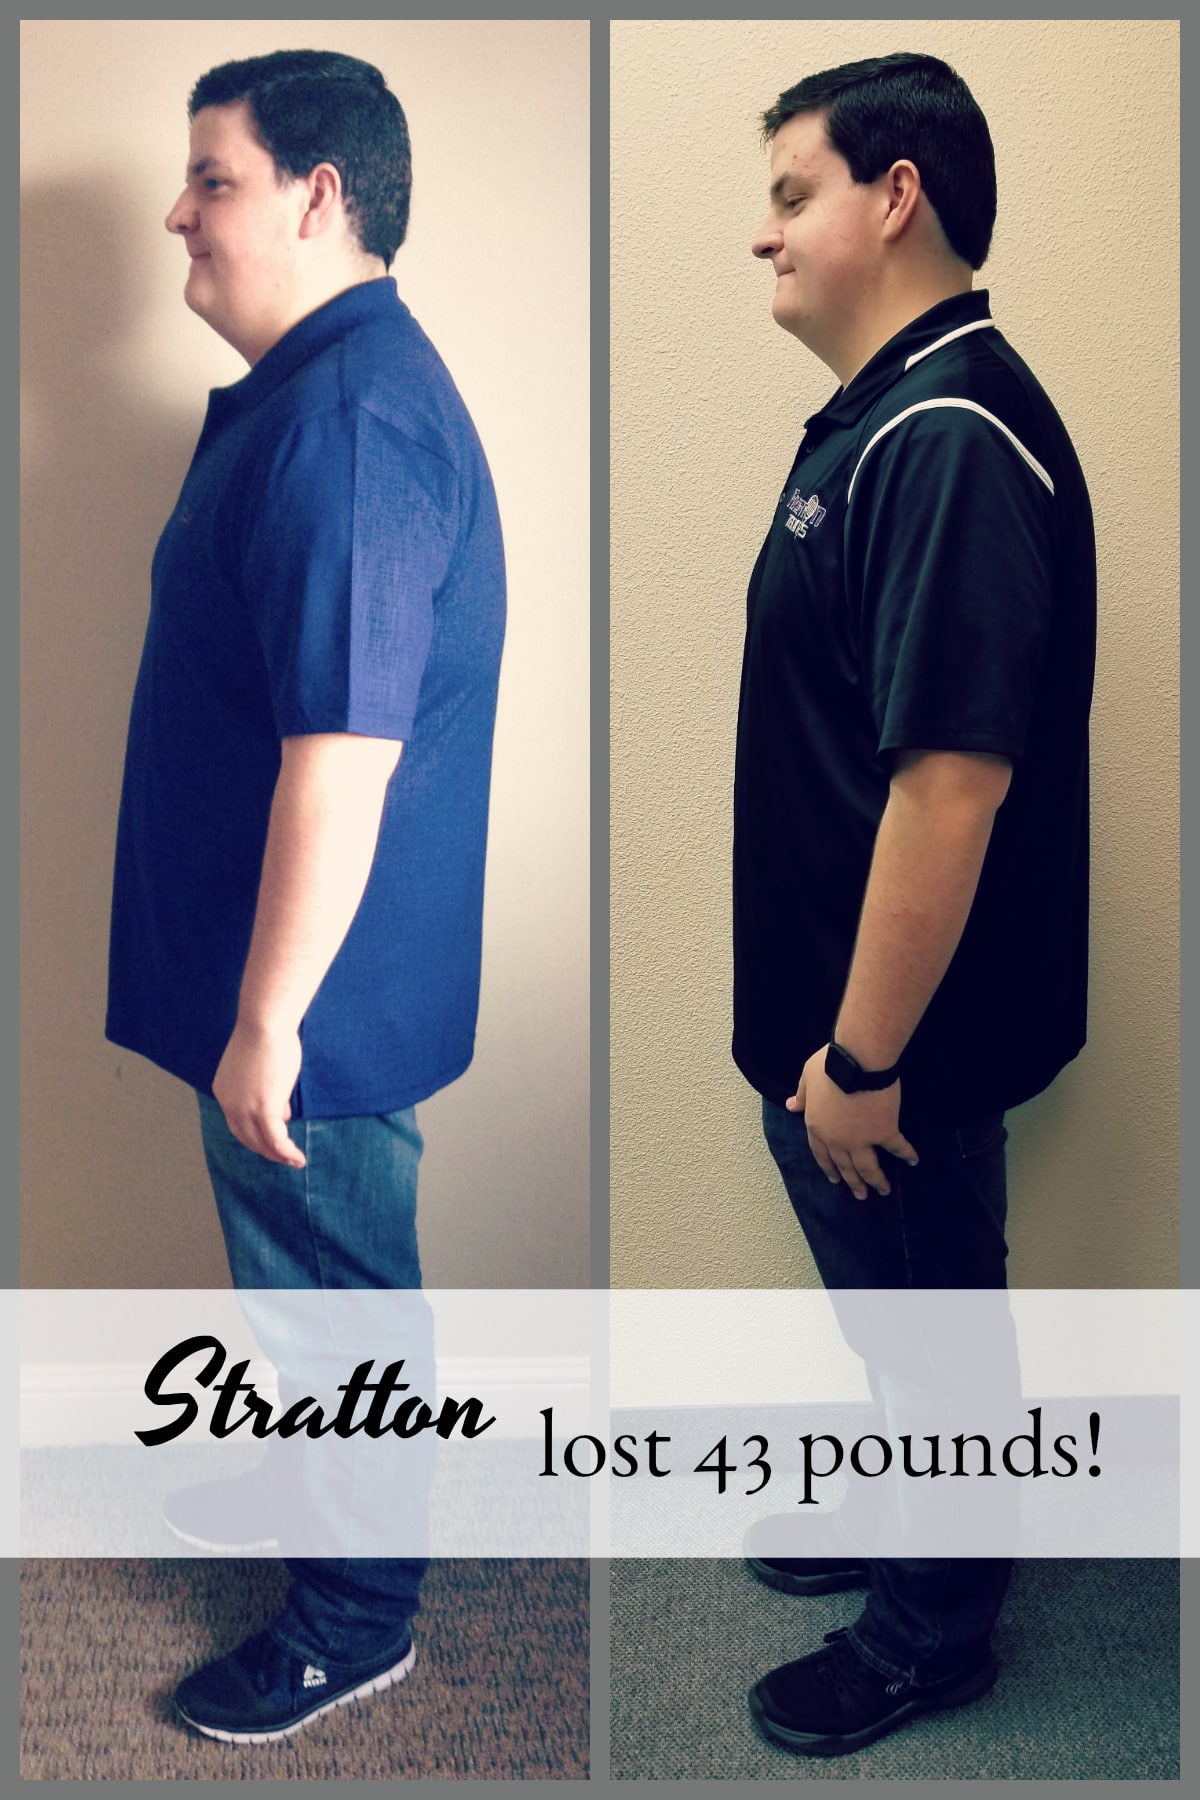 Stratton Butterfield lost 43 pounds